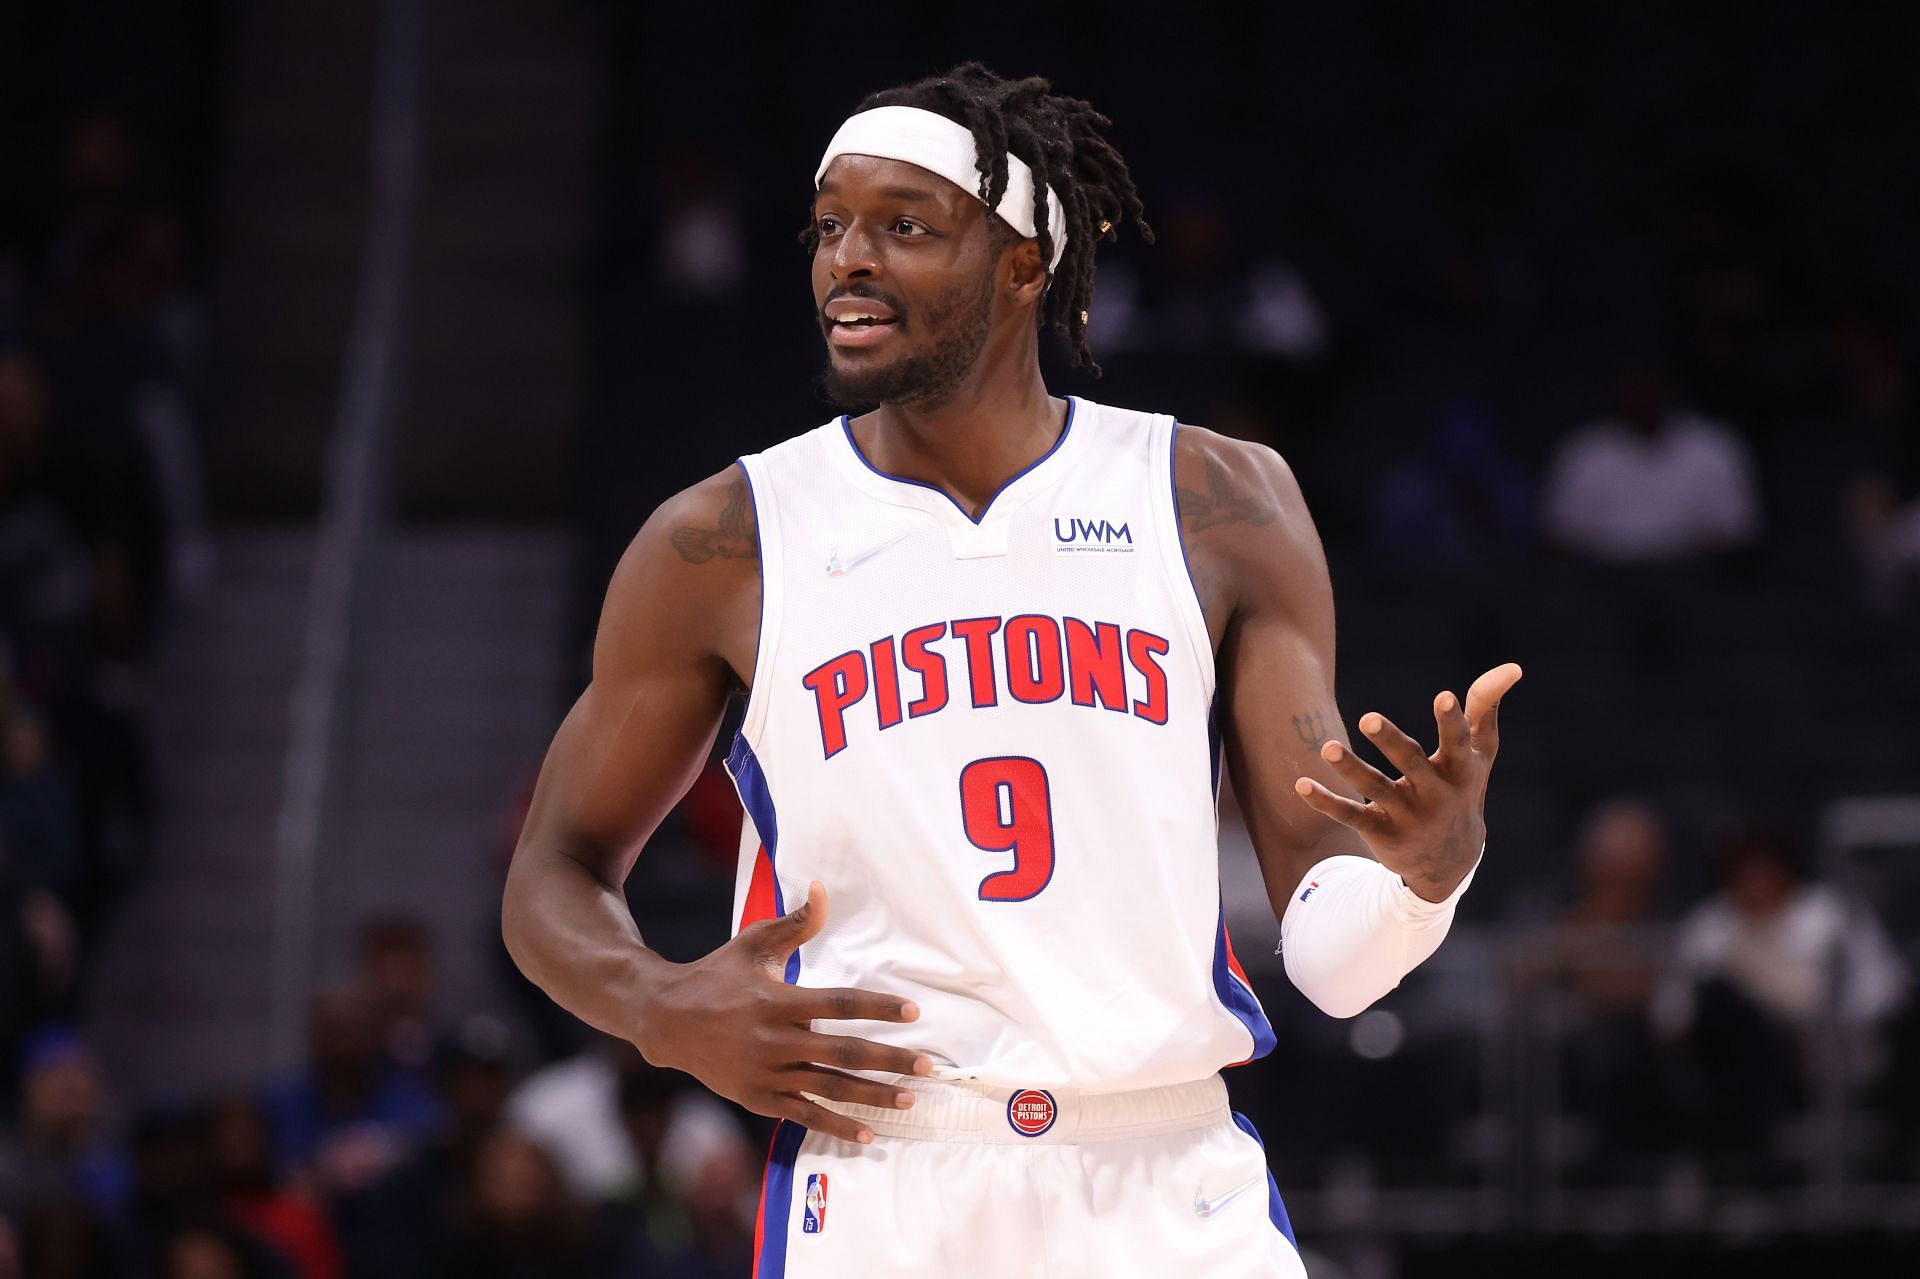 Jeff Eisenband on X: The @DetroitPistons announce they are